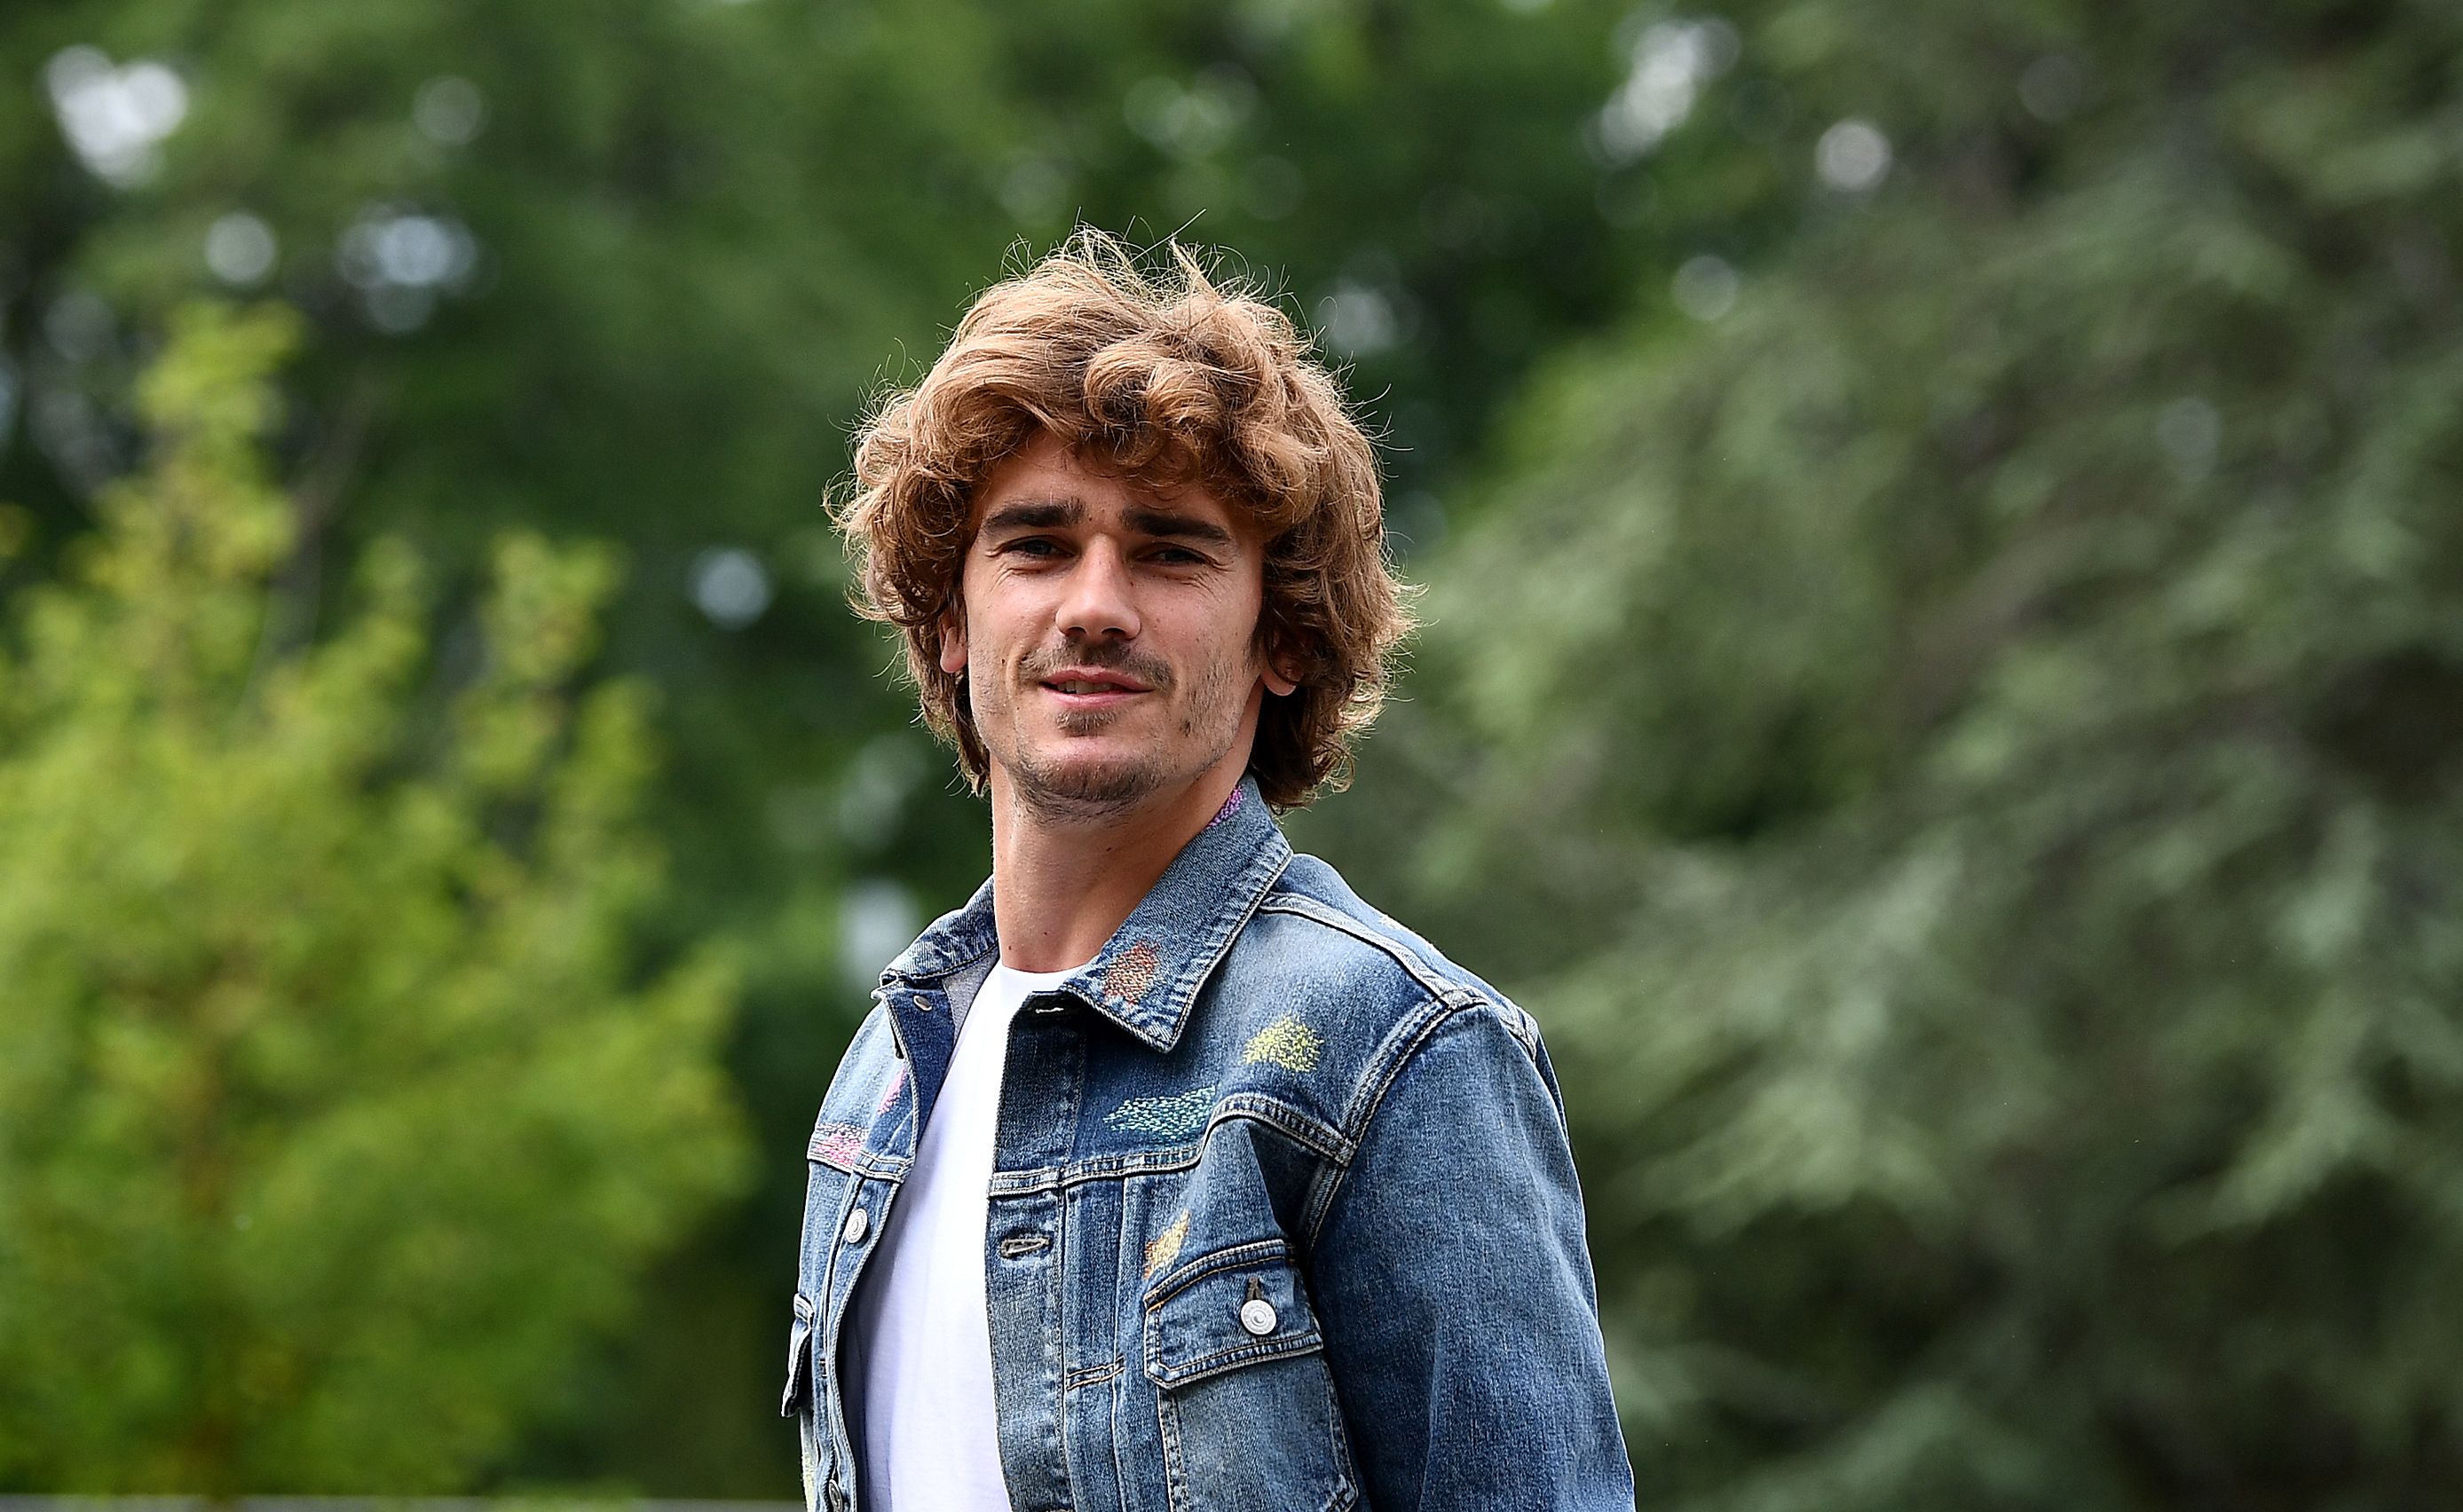 France's forward Antoine Griezmann arrives at the French national football team training base in Clairefontaine-en-Yvelines on May 29, 2019 as part of the team's preparation for the UEFA Euro 2020 qualifying Group H matches against Turkey and Andorra. (Photo by FRANCK FIFE / AFP)        (Photo credit should read FRANCK FIFE/AFP/Getty Images)